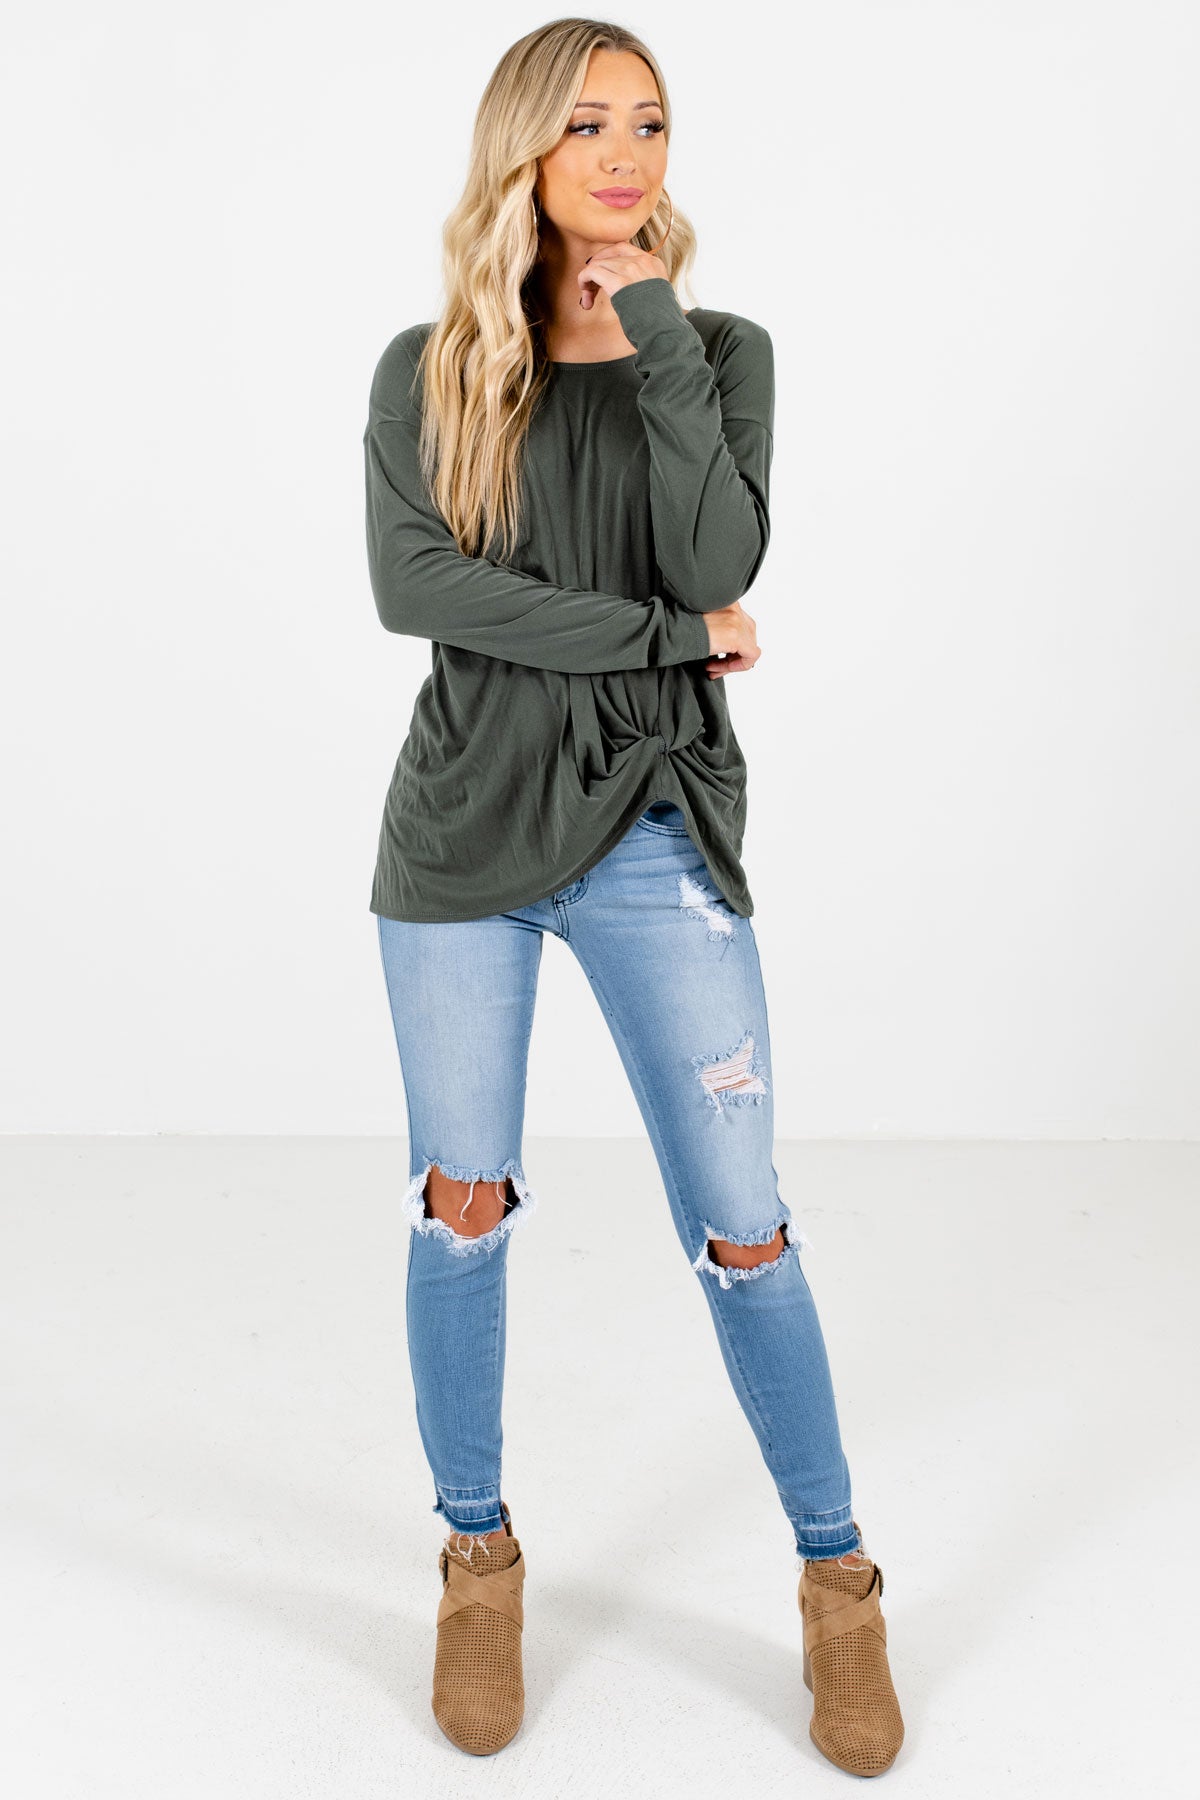 Women’s Green Fall and Winter Boutique Clothing